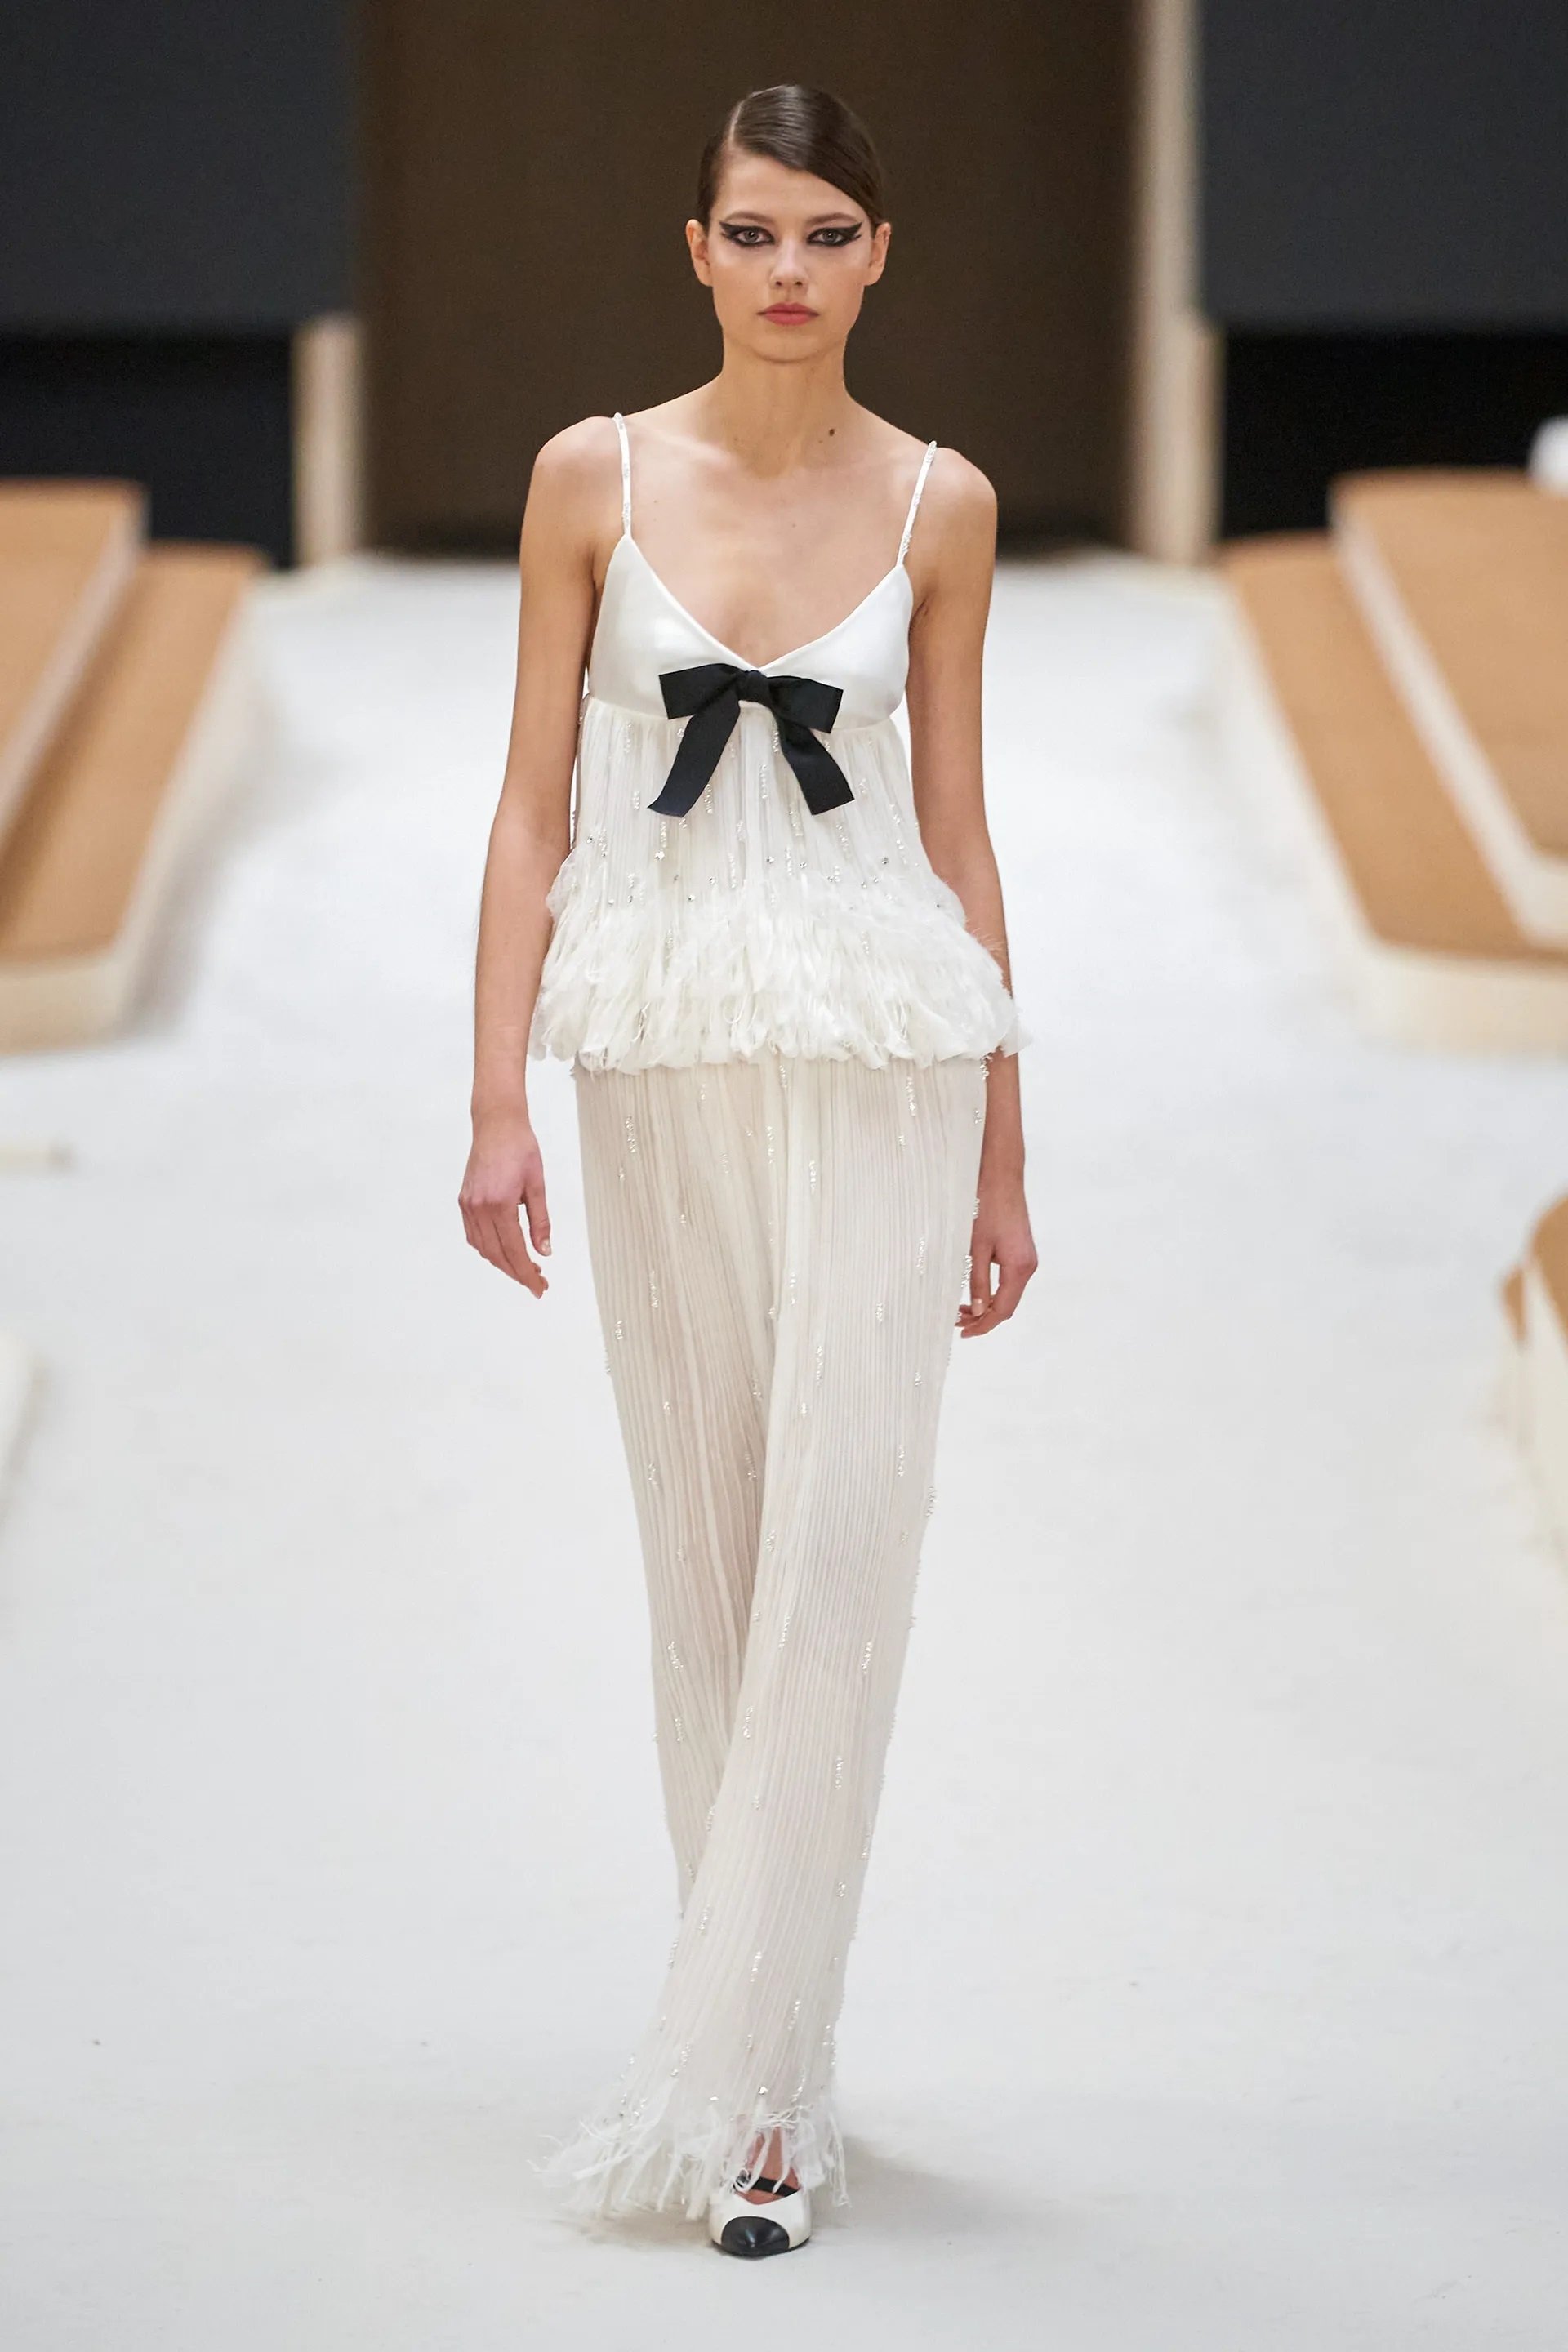 Chanel HC Strapless Bustier Gown in White — UFO No More